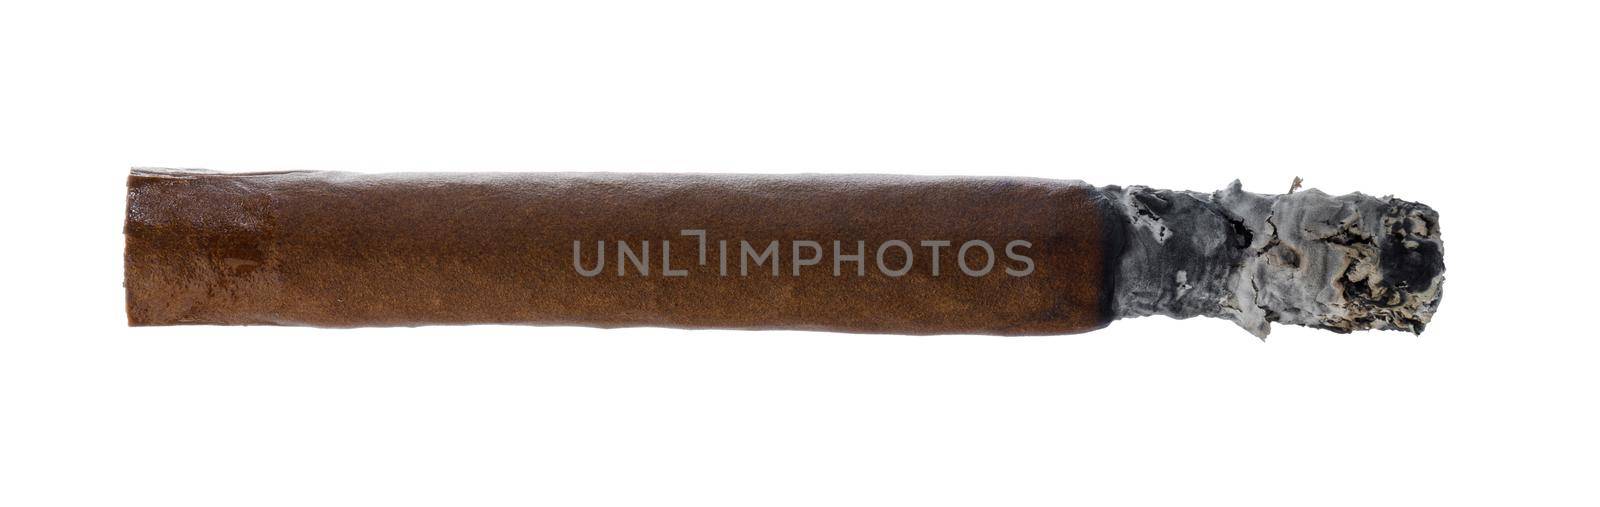 Burning hand rolled cigar isolated on white by Fabrikasimf